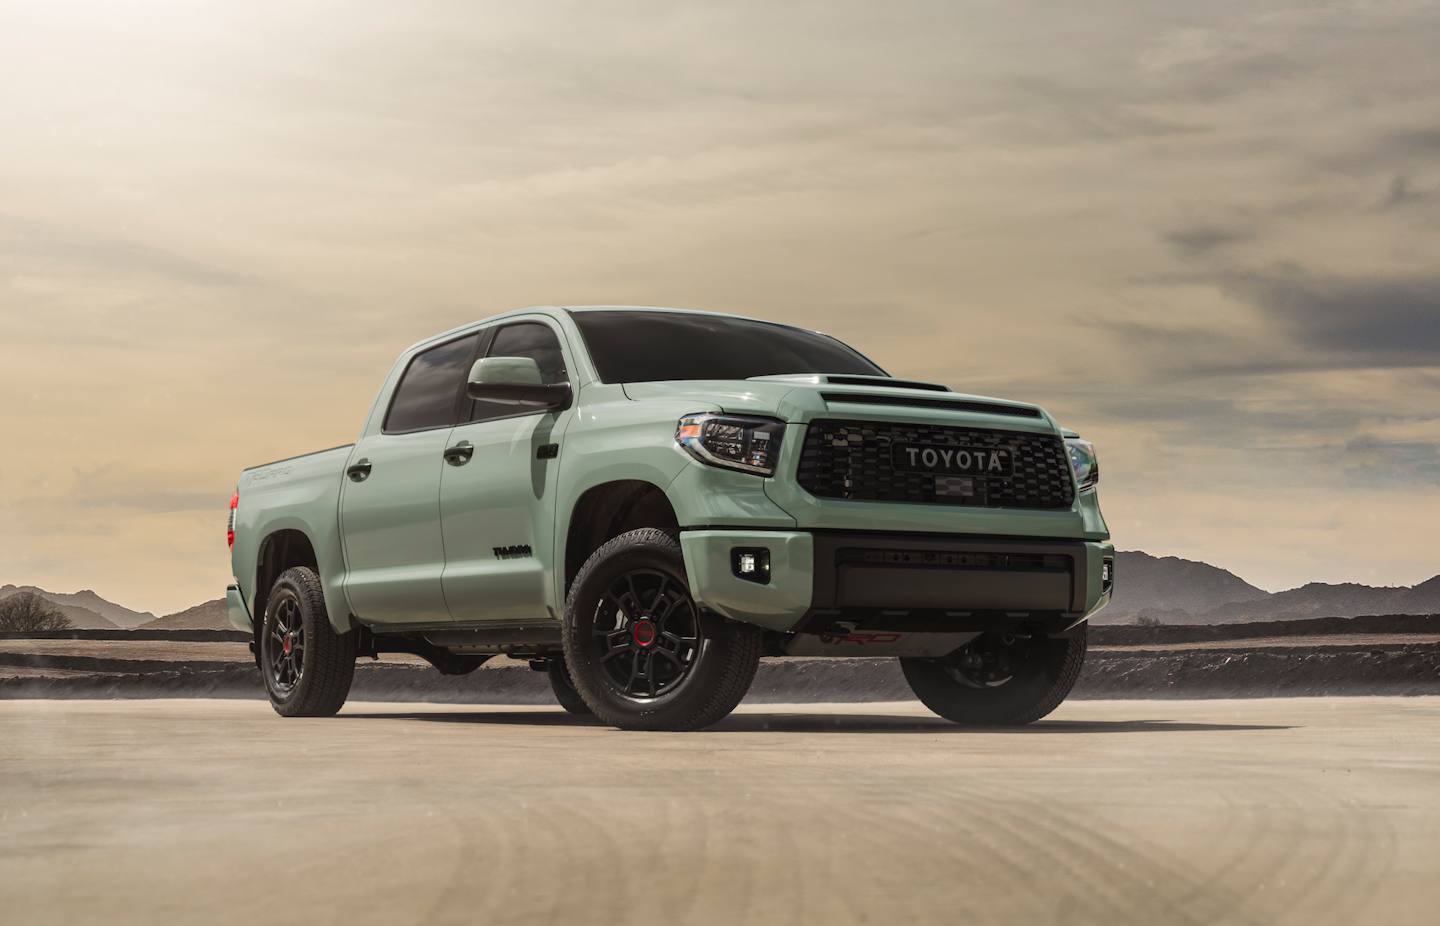 2022 Toyota Tundra grille is getting grilled by fans | Hard Working Trucks